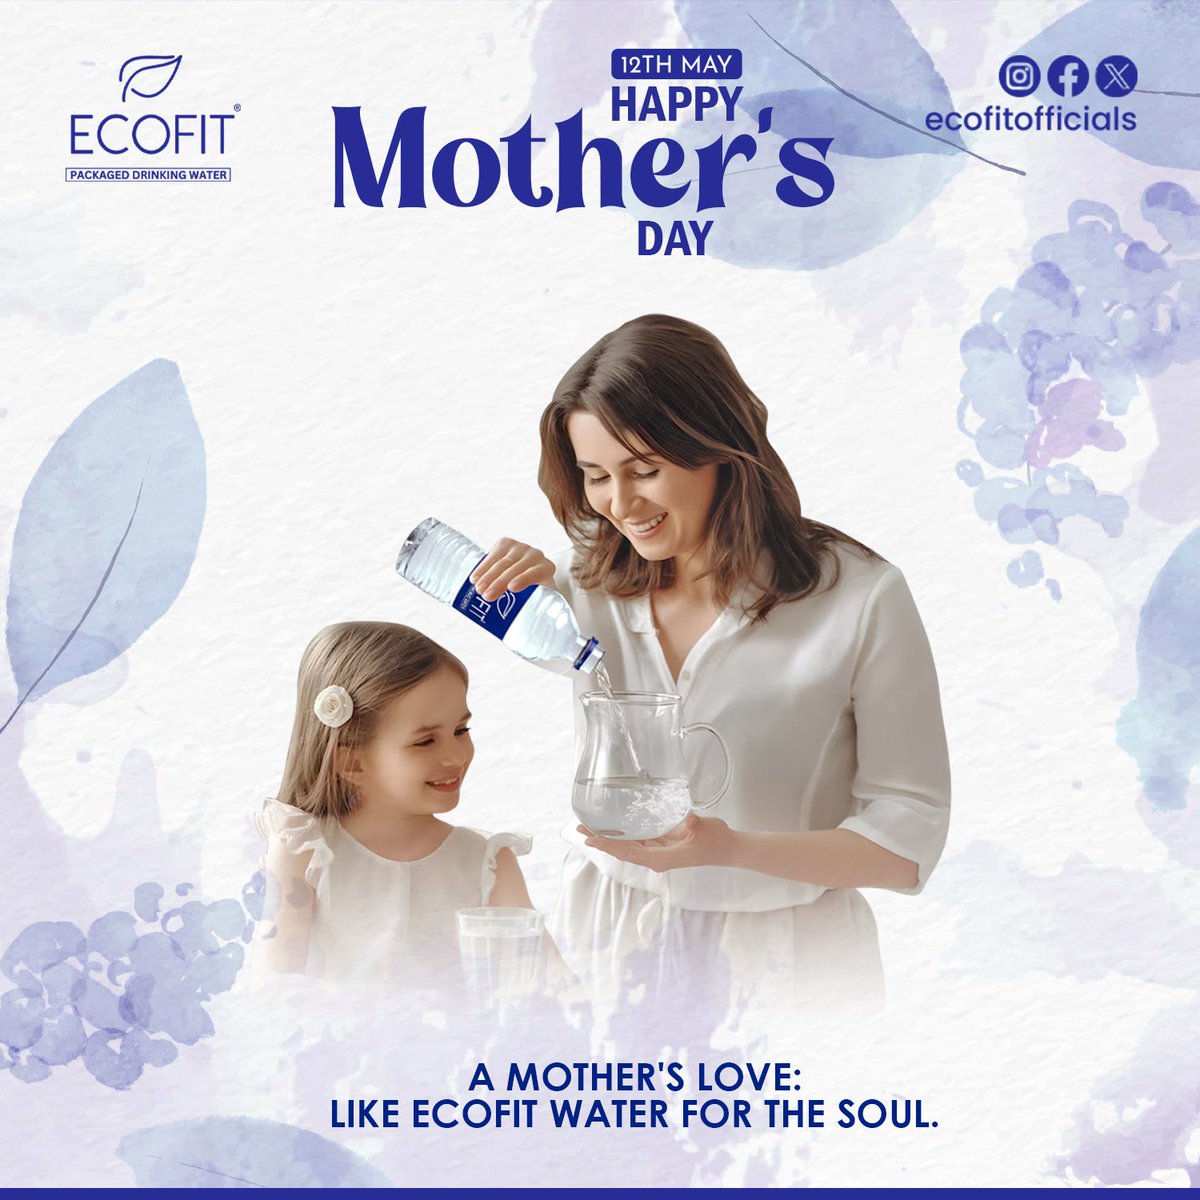 A Mother's Love :- Like Ecofit Water For The Soul.
#Ecofit Celebrates All The Incredible Mothers Out There Who Are Making The Impossible Possible.

#Mothers #MothersDay #MineralWater #StayHydrated #StayFit